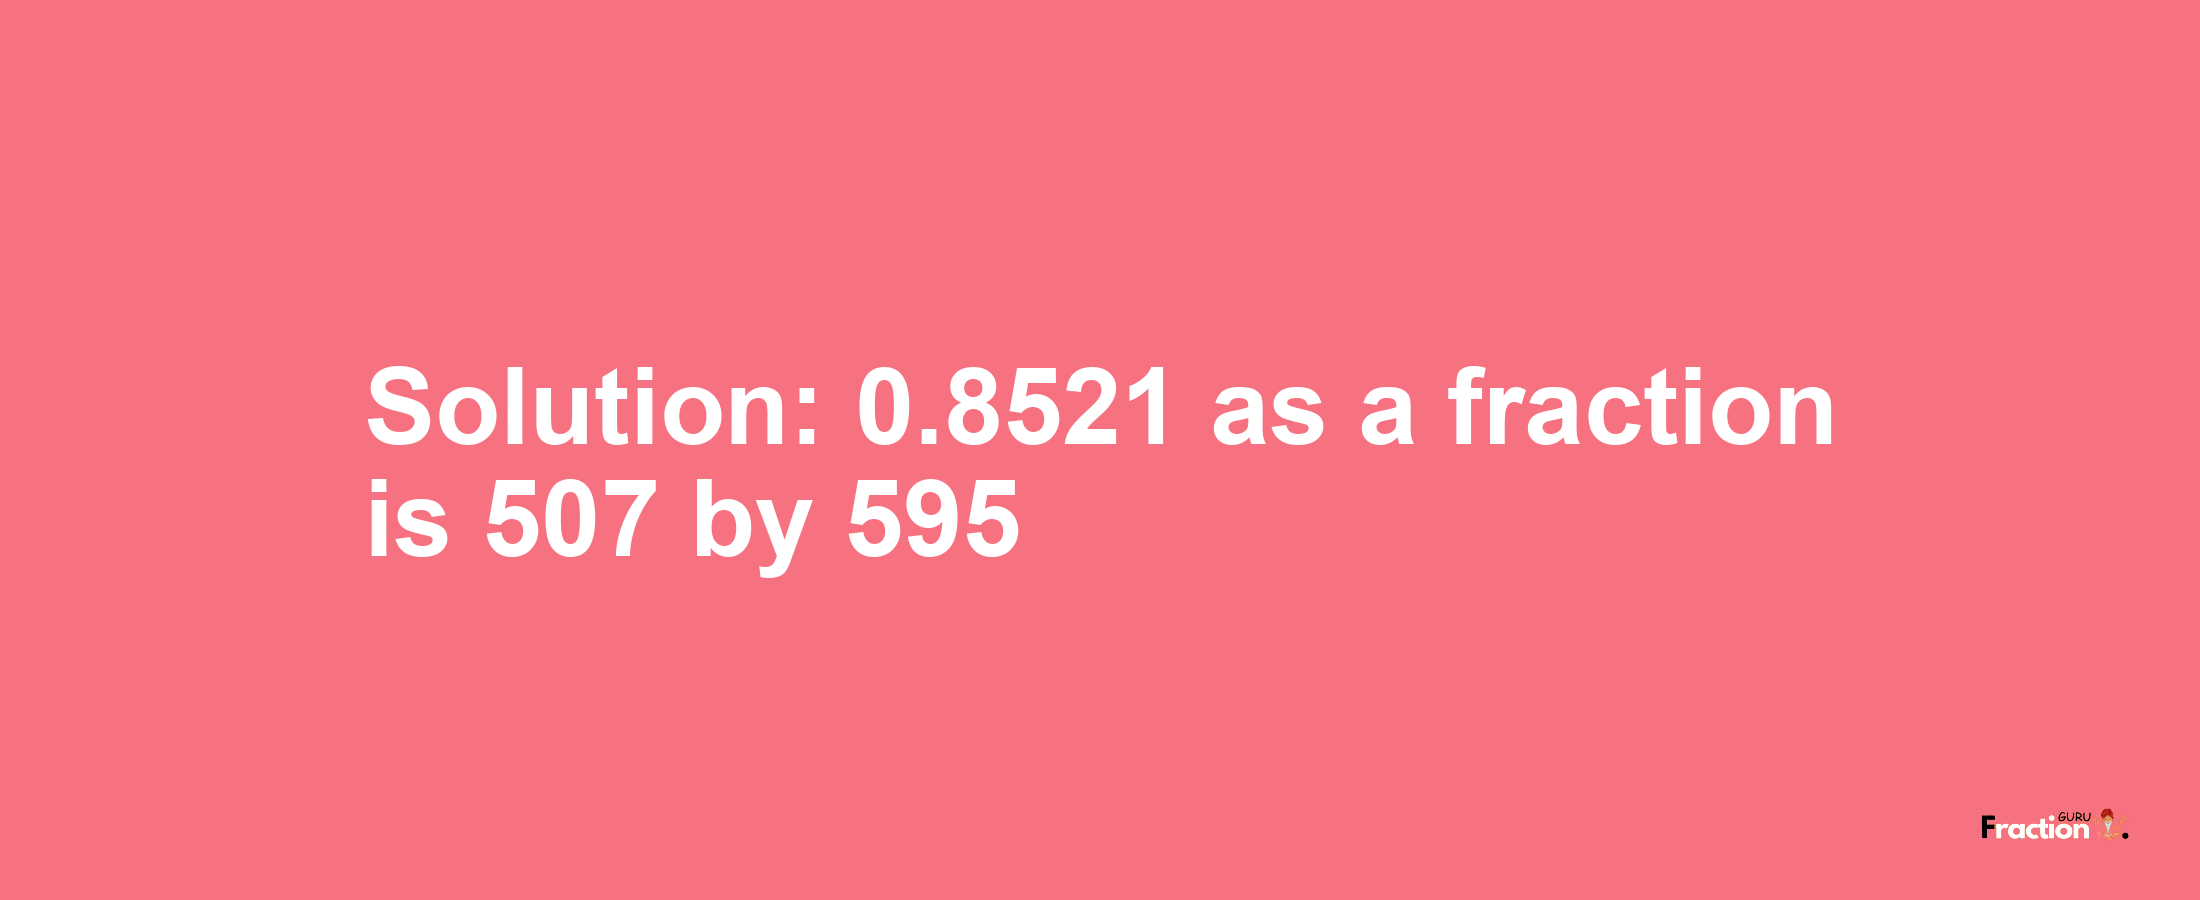 Solution:0.8521 as a fraction is 507/595